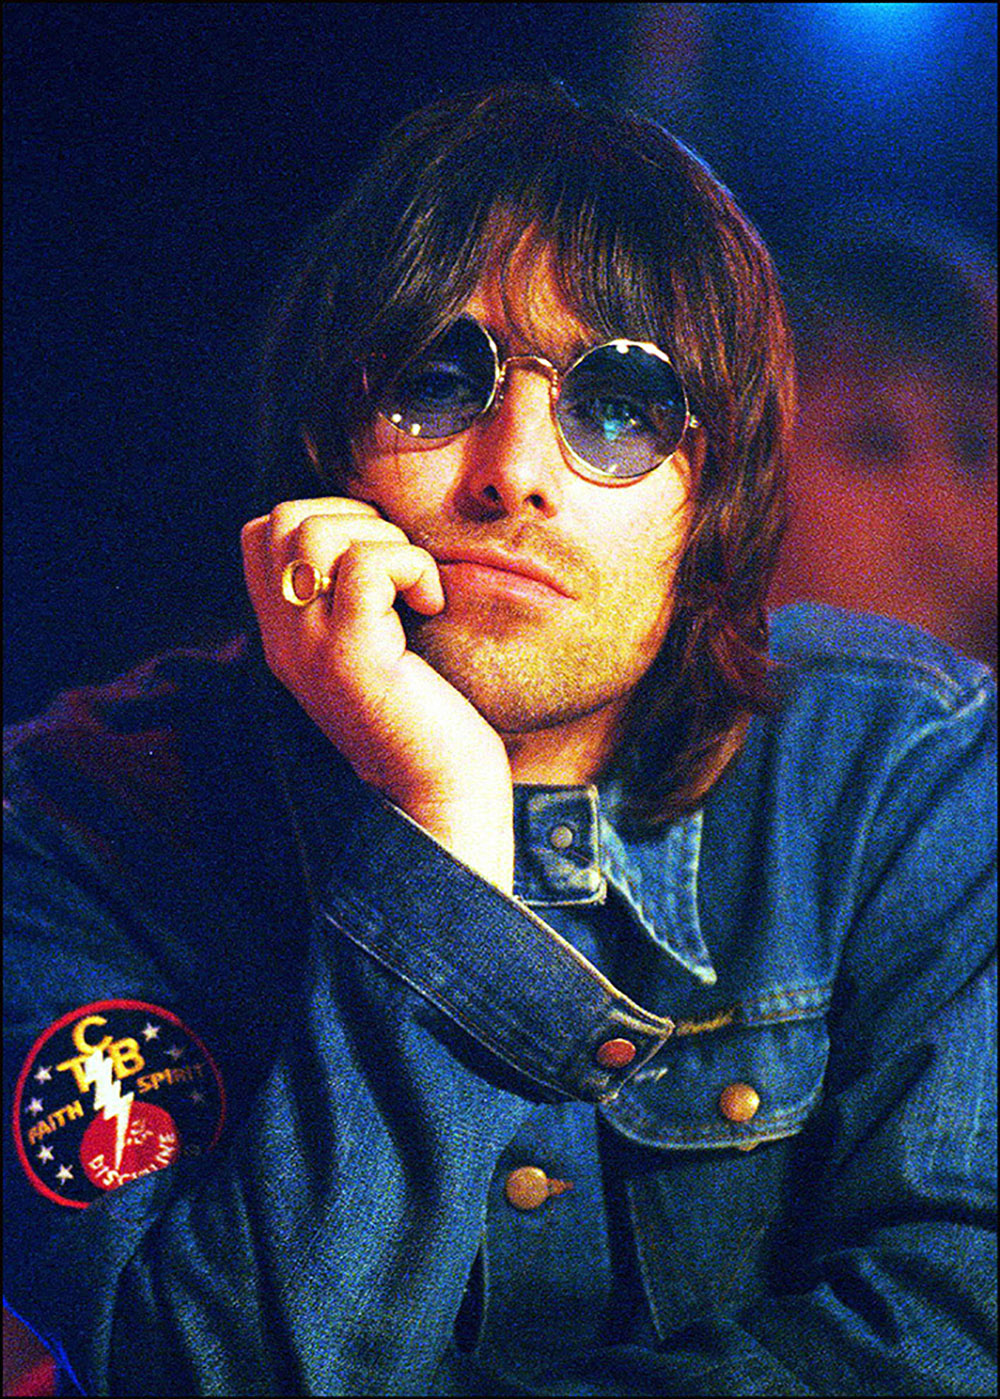 OASIS, Liam Gallagher at Top of the Pops BBC TV, 11 May 2000